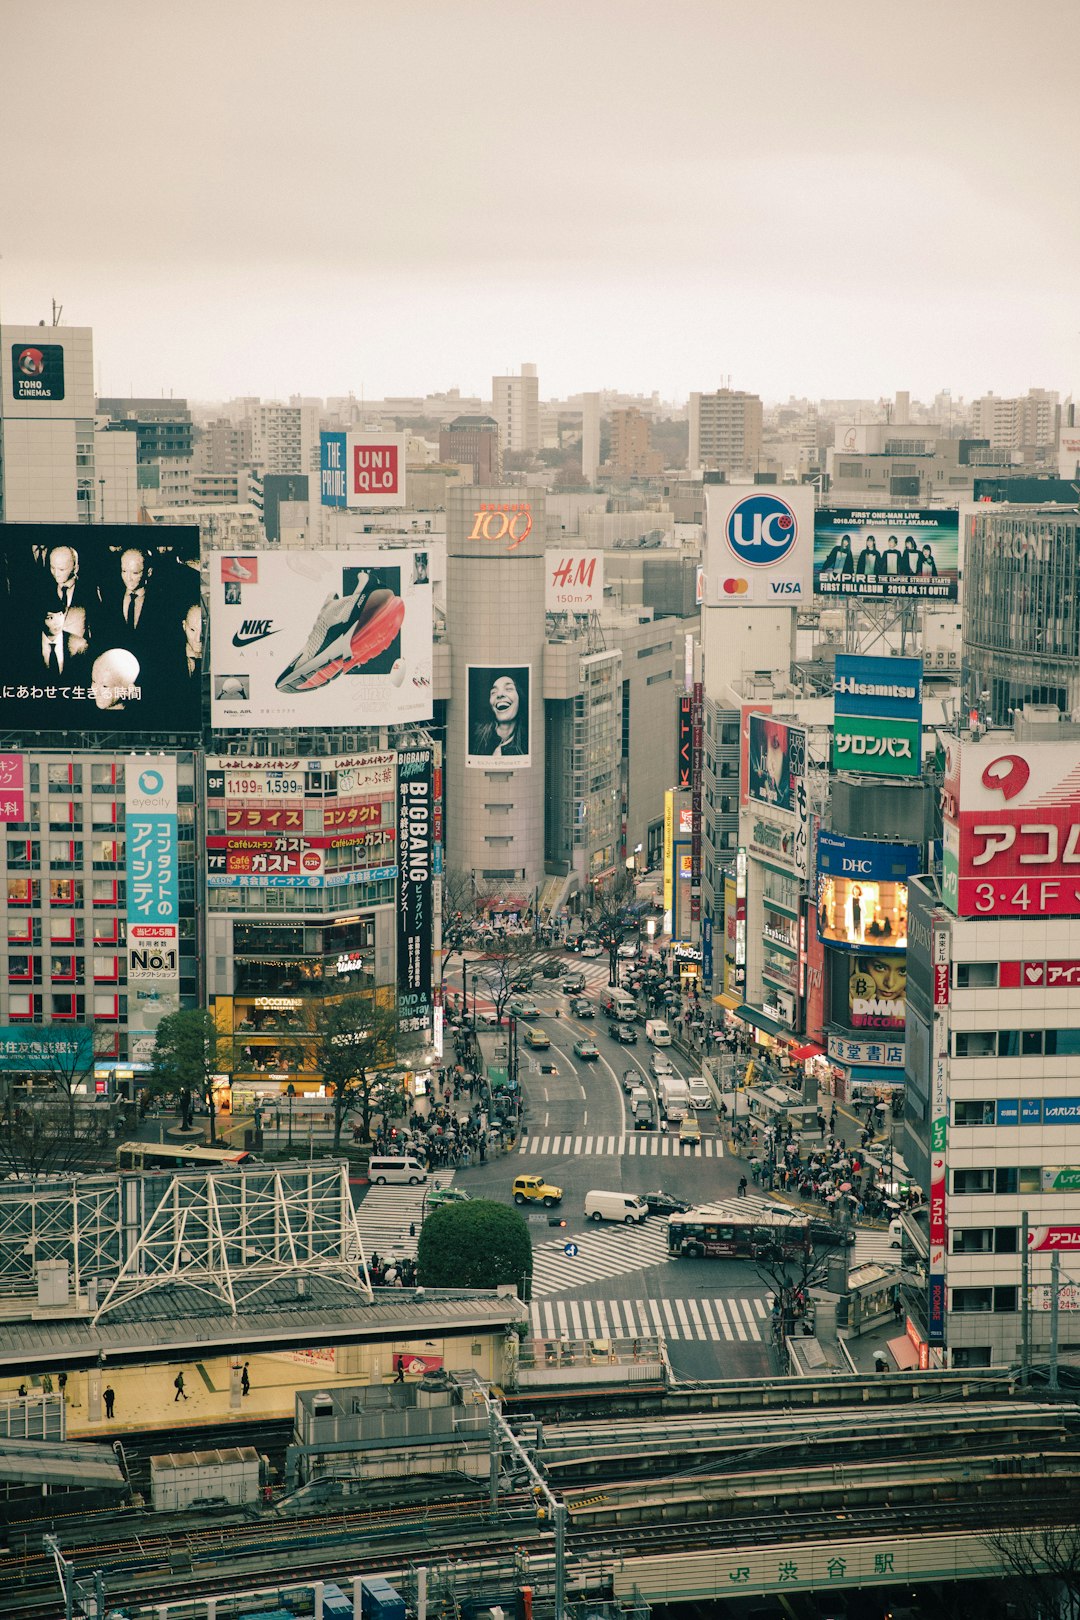 travelers stories about Town in Shibuya Crossing, Japan